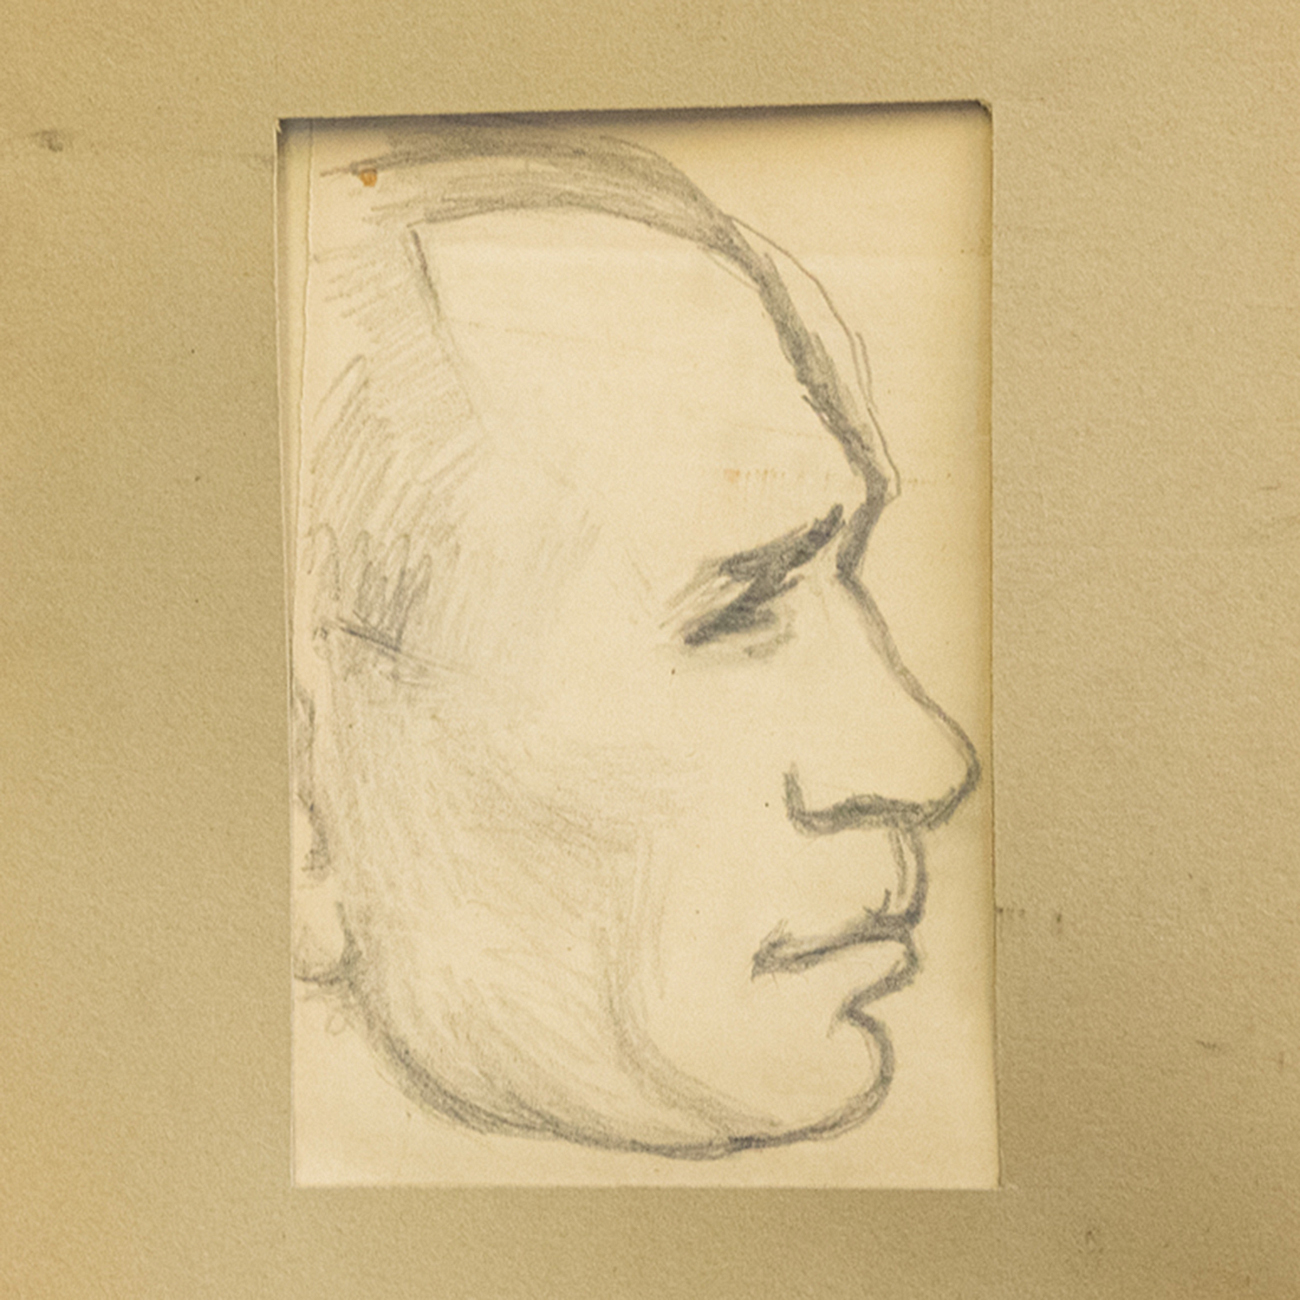 A sketch of a man's profile on aged paper, featuring distinct, sharp pencil lines.